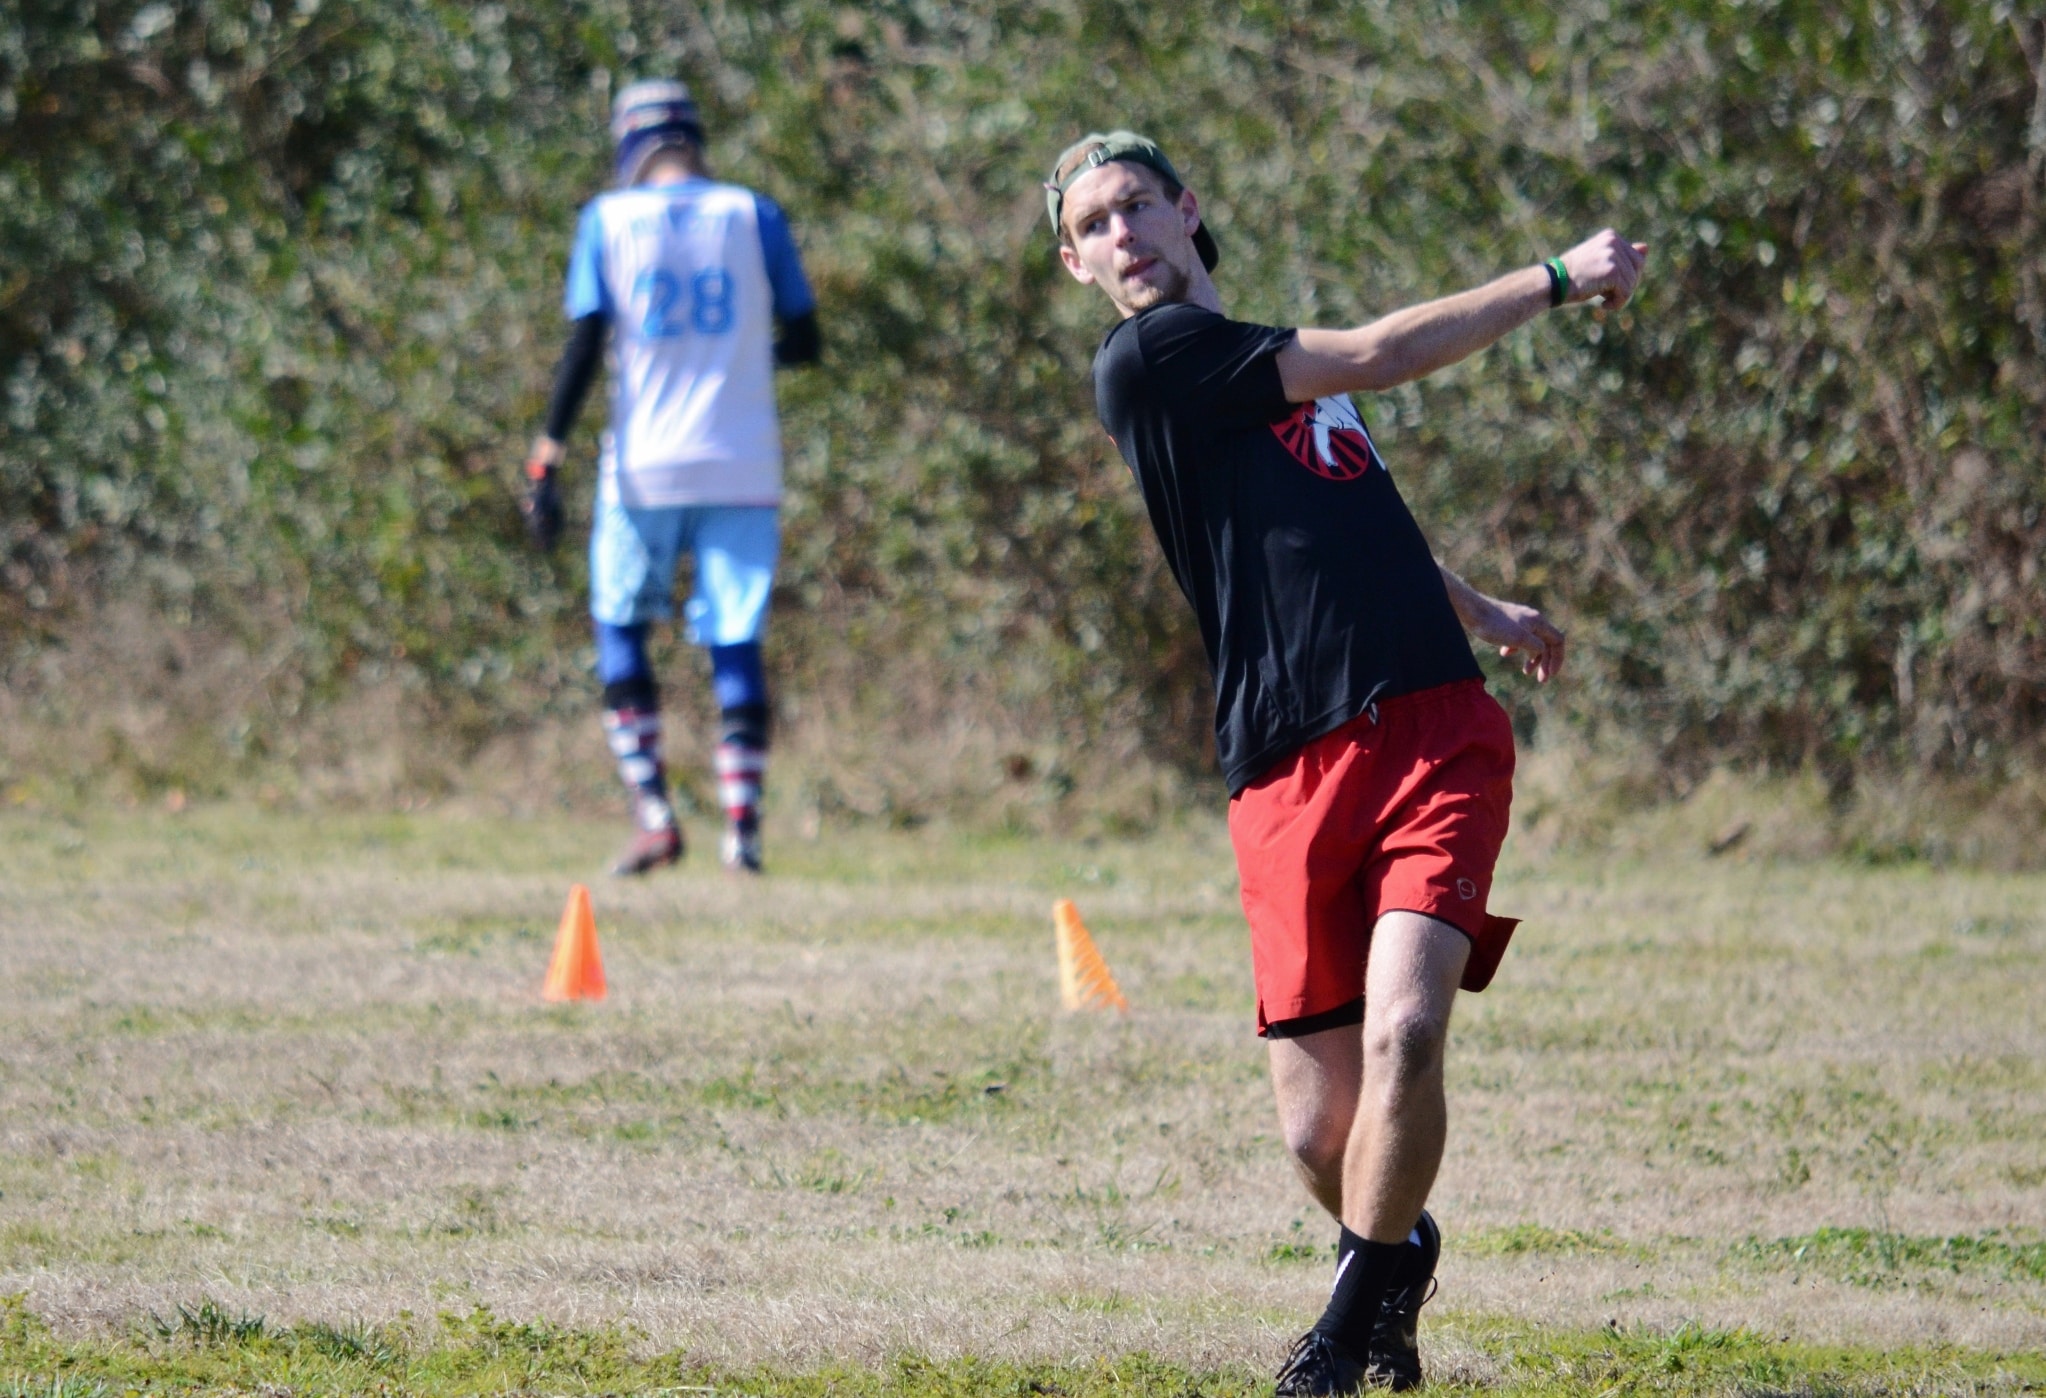 Tanner Furr pulls the disc to the other side of the field with all he has in him on this windy day.&nbsp;